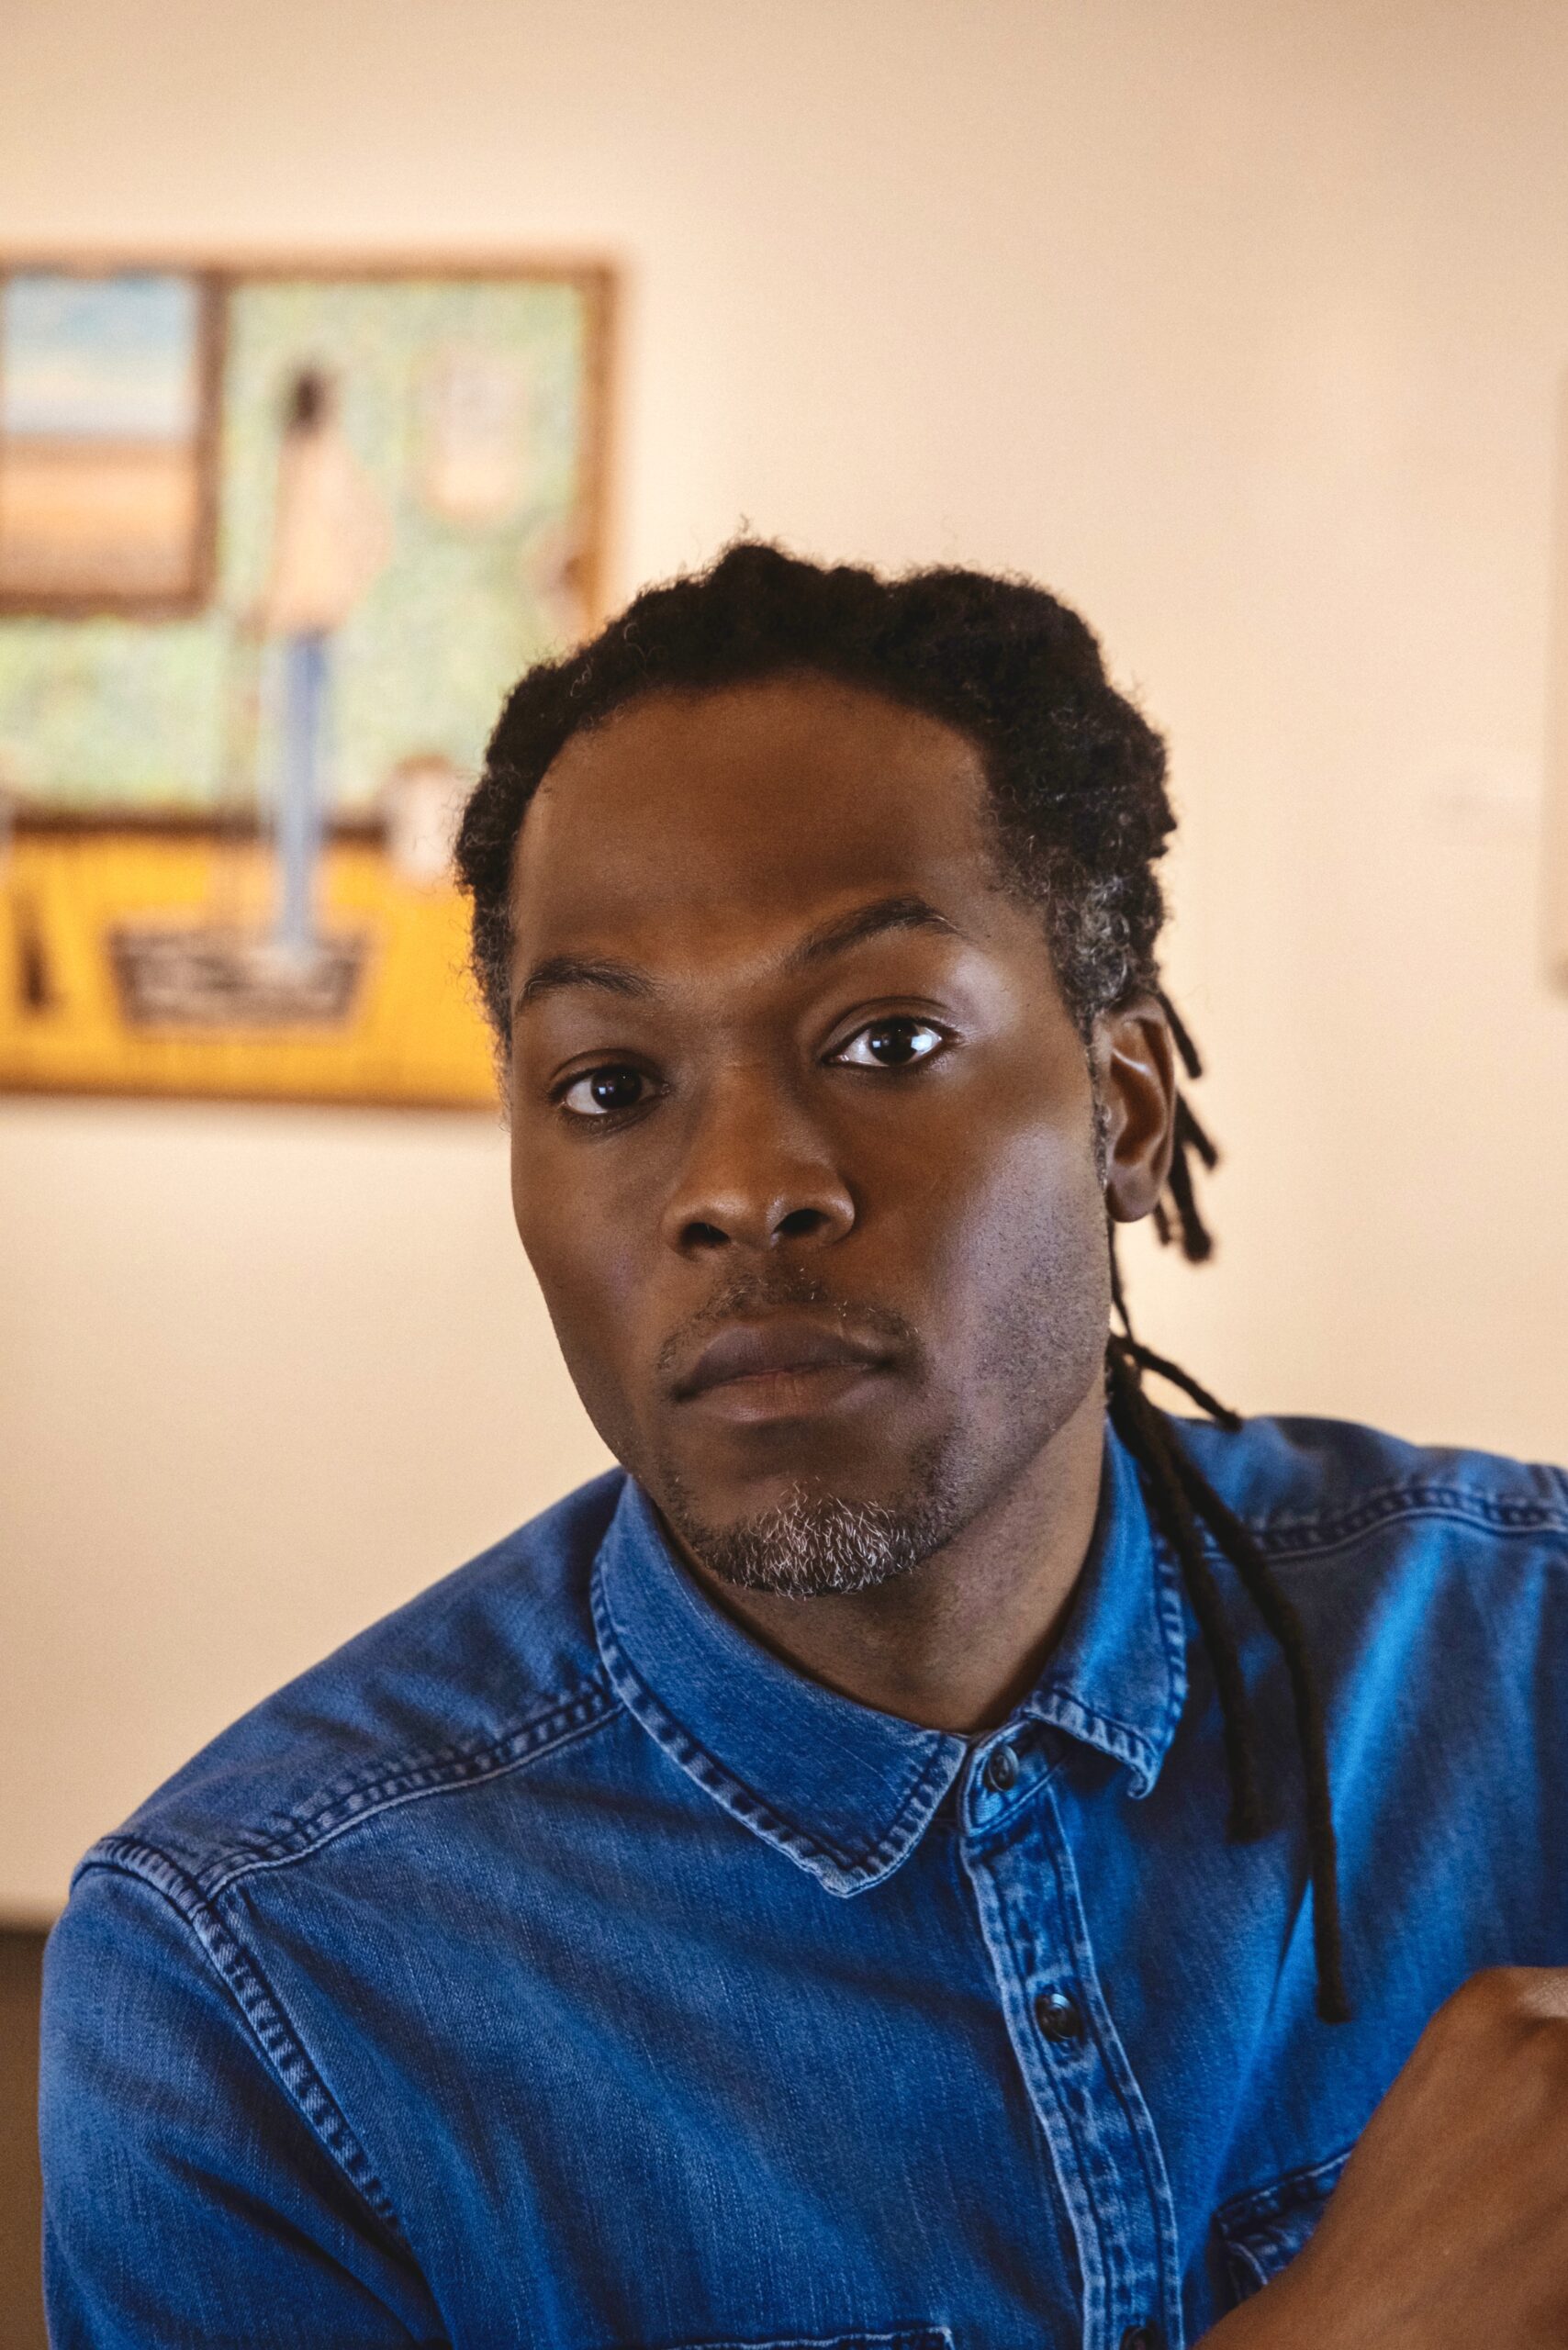 A person in a button up blue collared shirt looks directly into the camera with eyebrows raised. They have their hair pulled back.